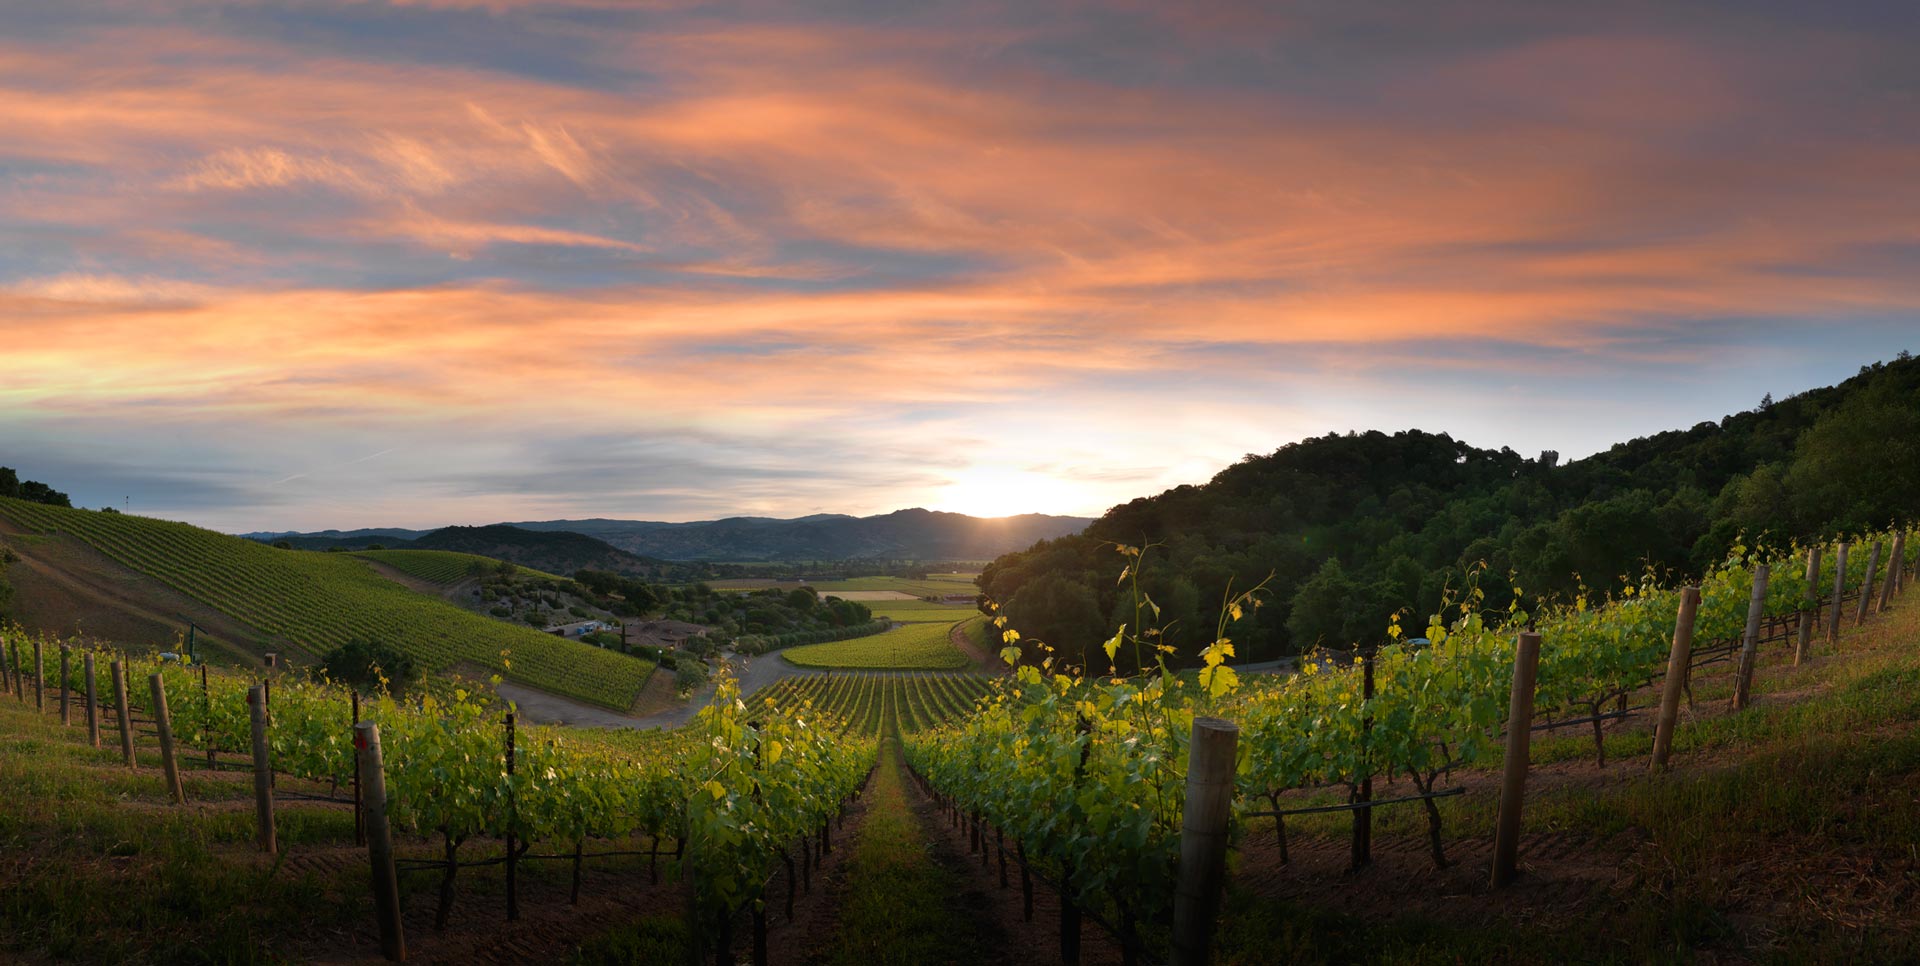 4 Wineries You Have To Visit in #NapaValley